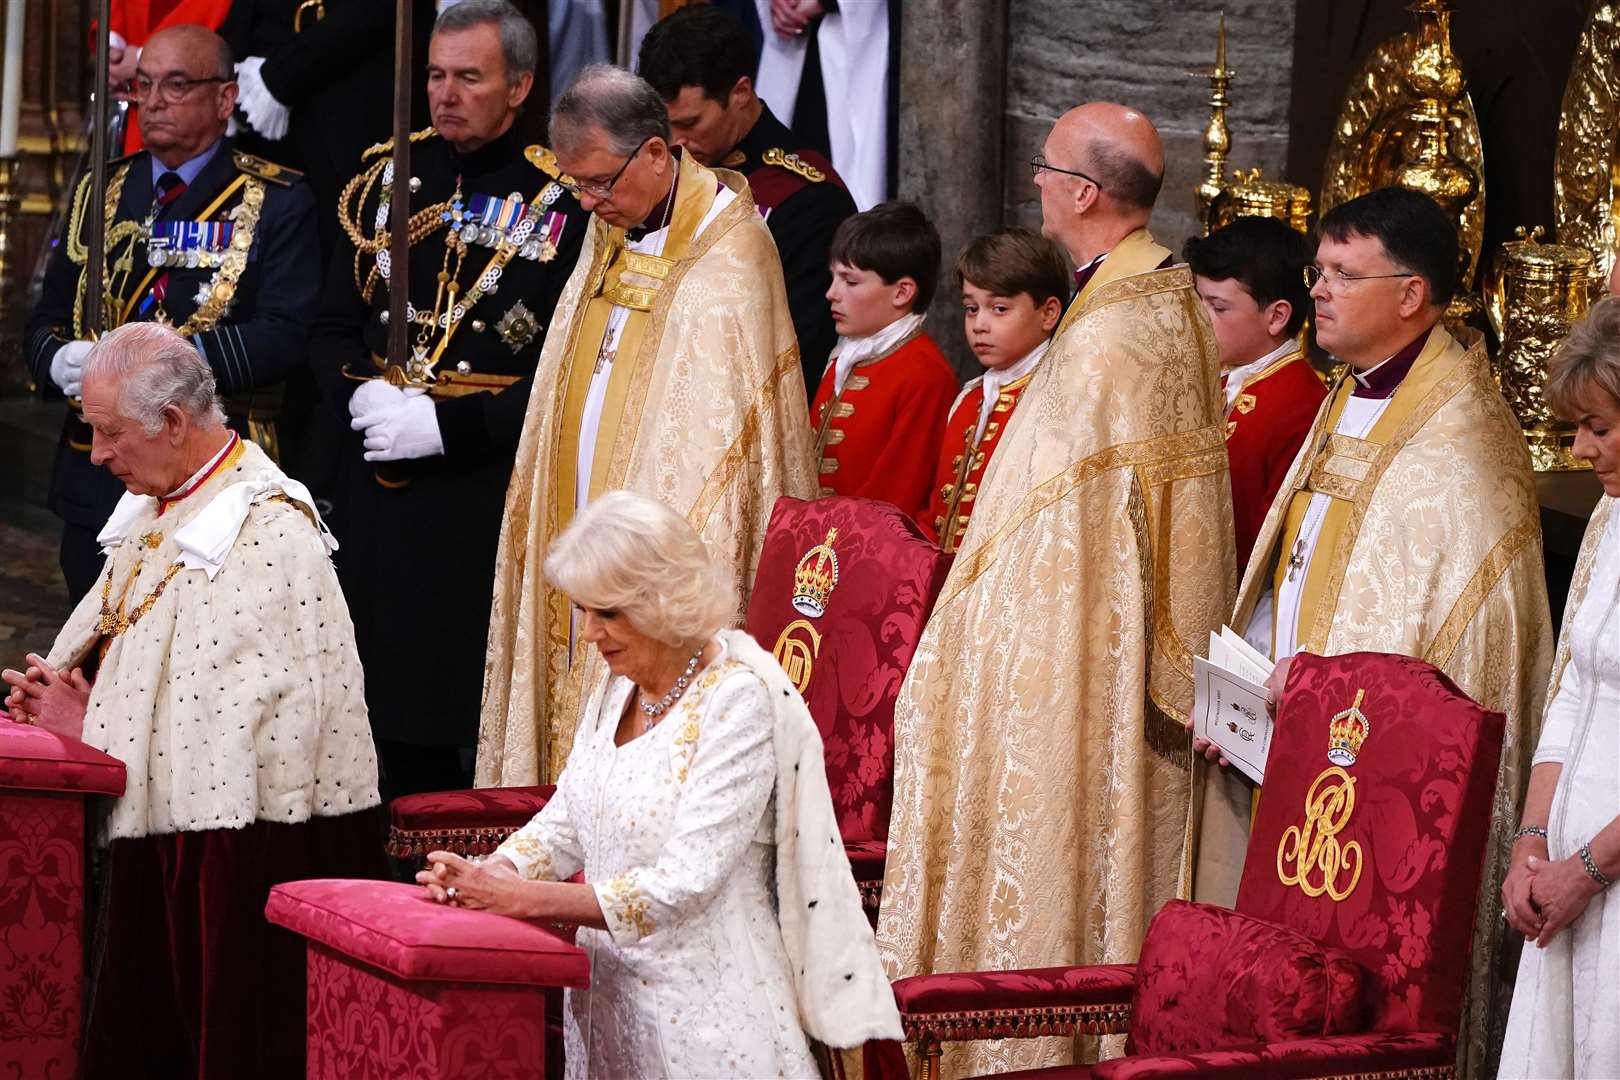 Prince George watches King Charles III and Queen Camilla during their coronation ceremony in Westminster Abbey, London. Picture date: Saturday May 6, 2023.